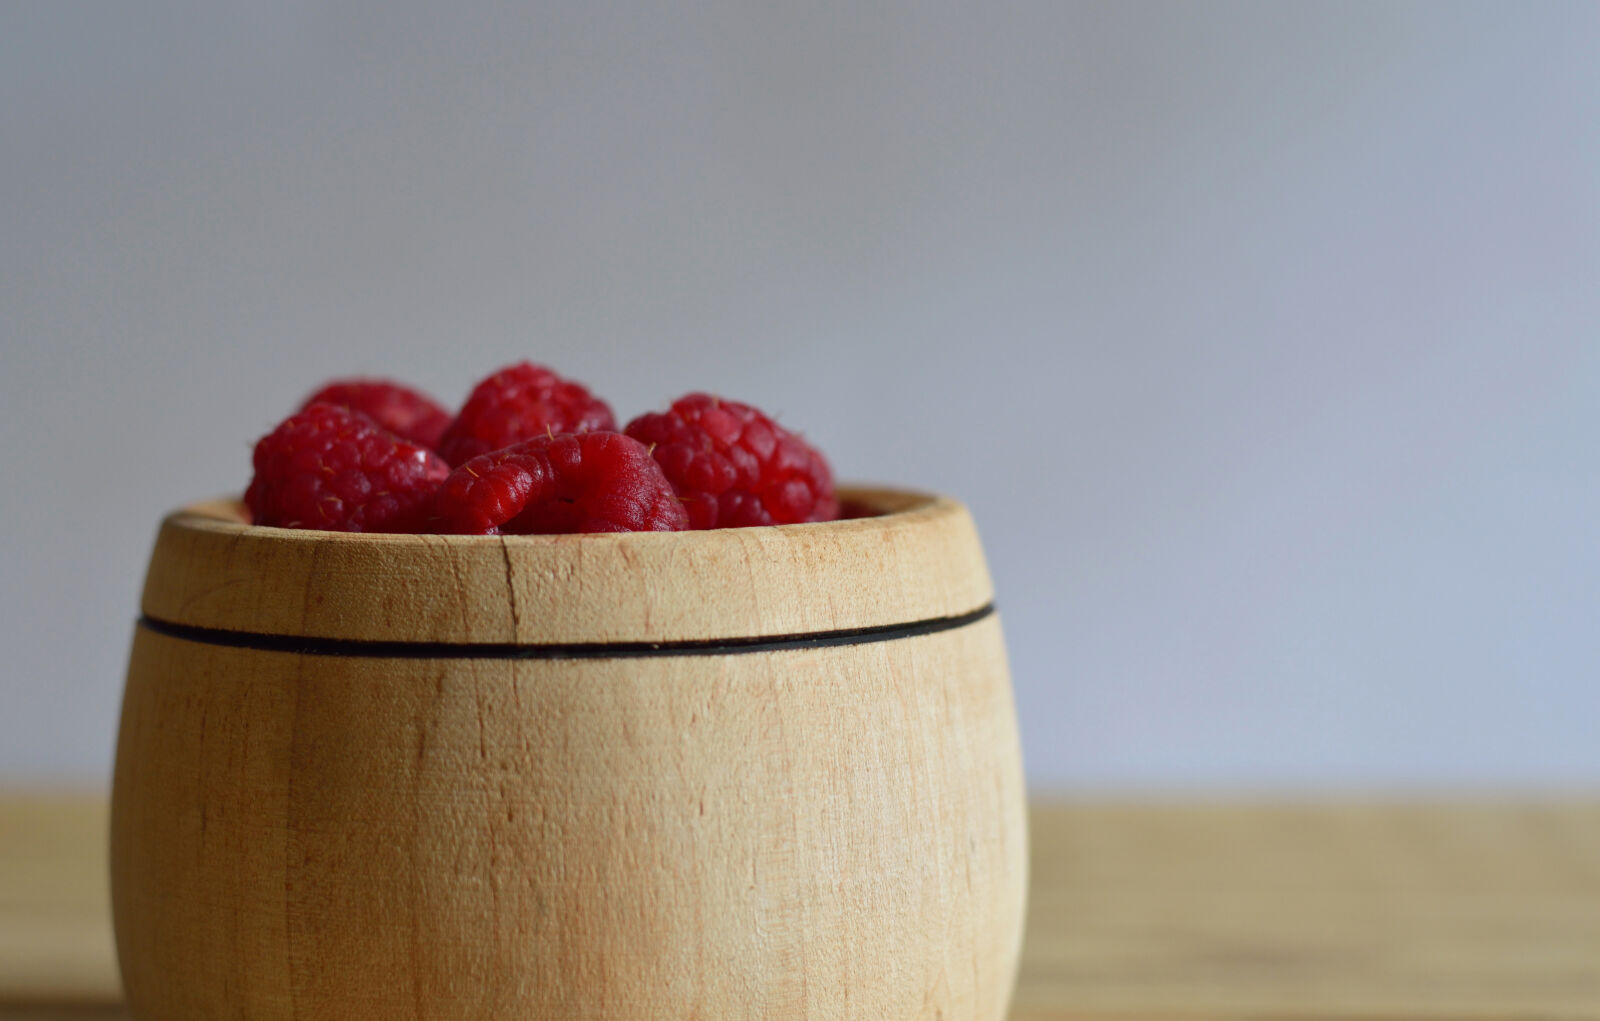 Nikon D3200 sample photo. Berry, bowl, container, food photography